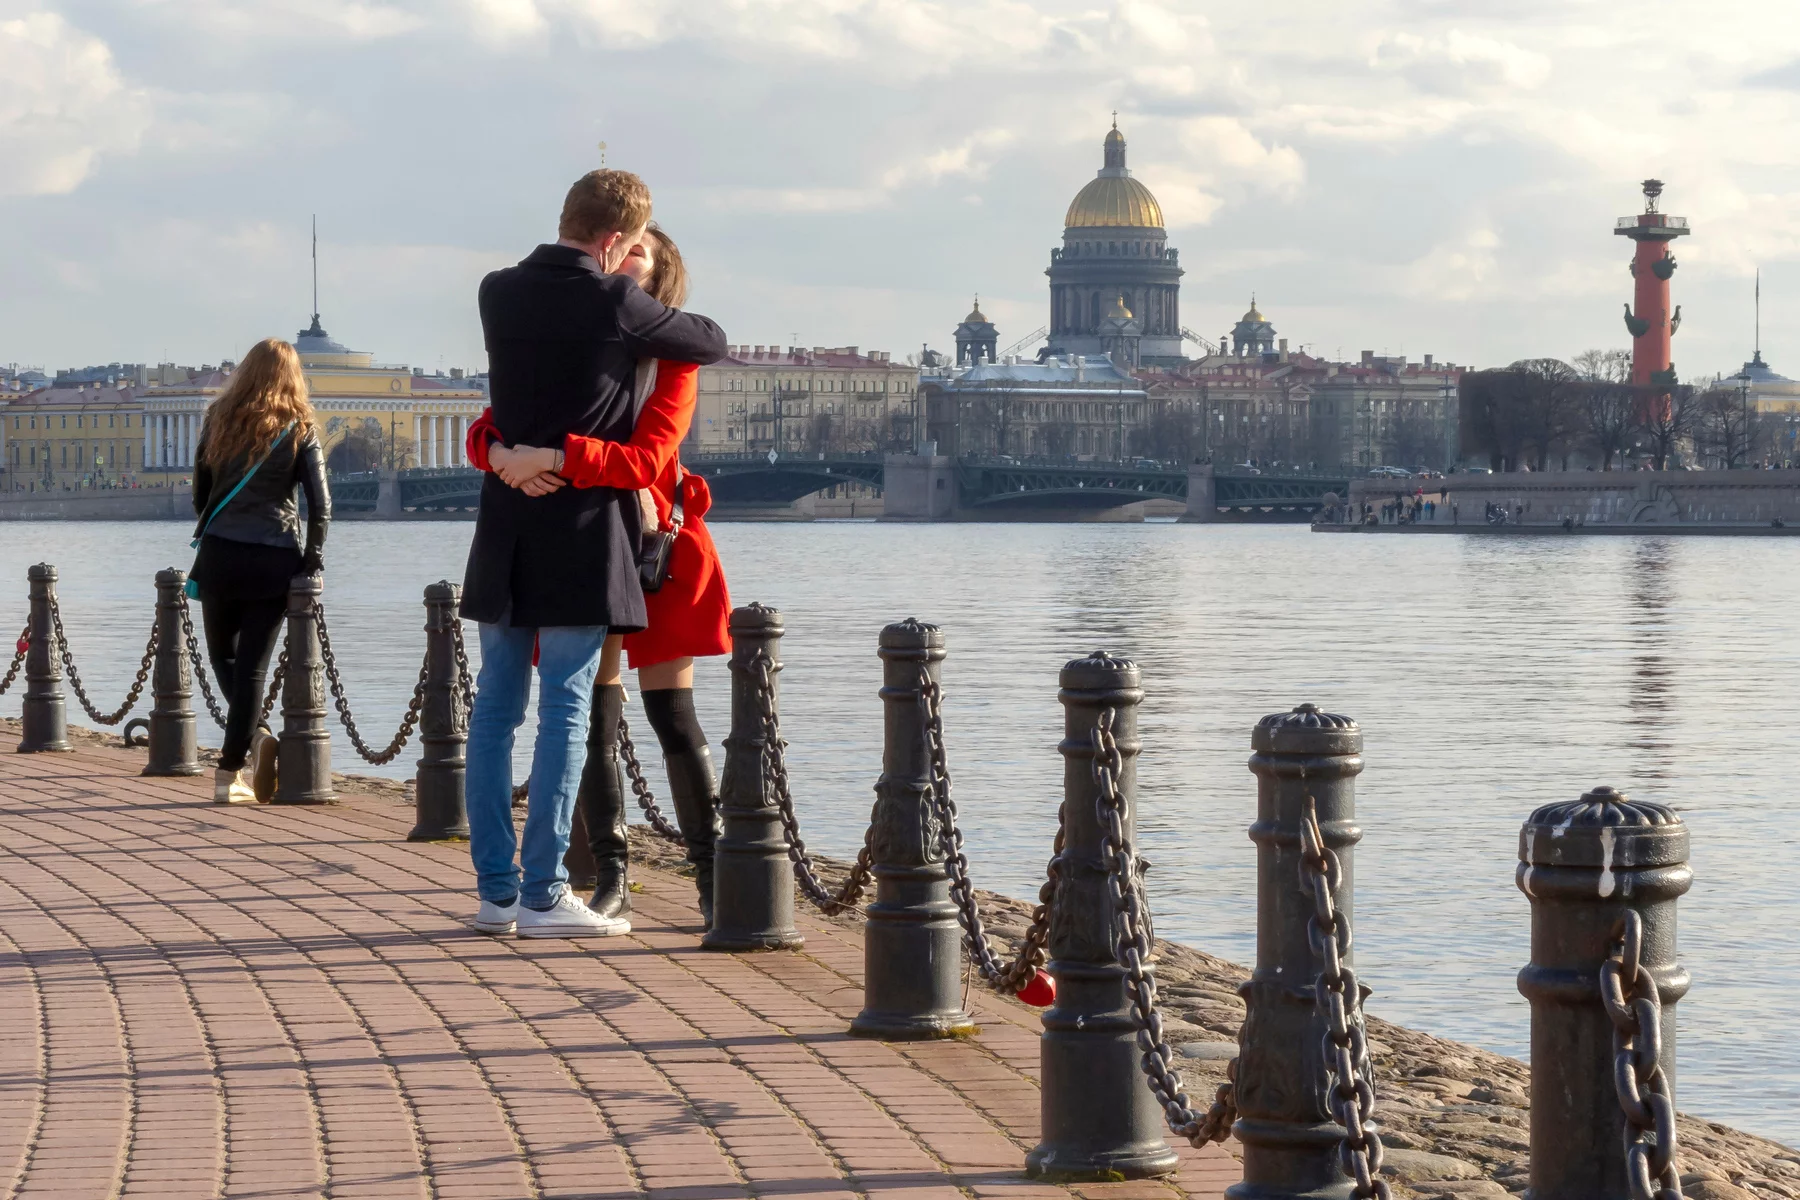 Couple kissing on a date in Saint Petersburg